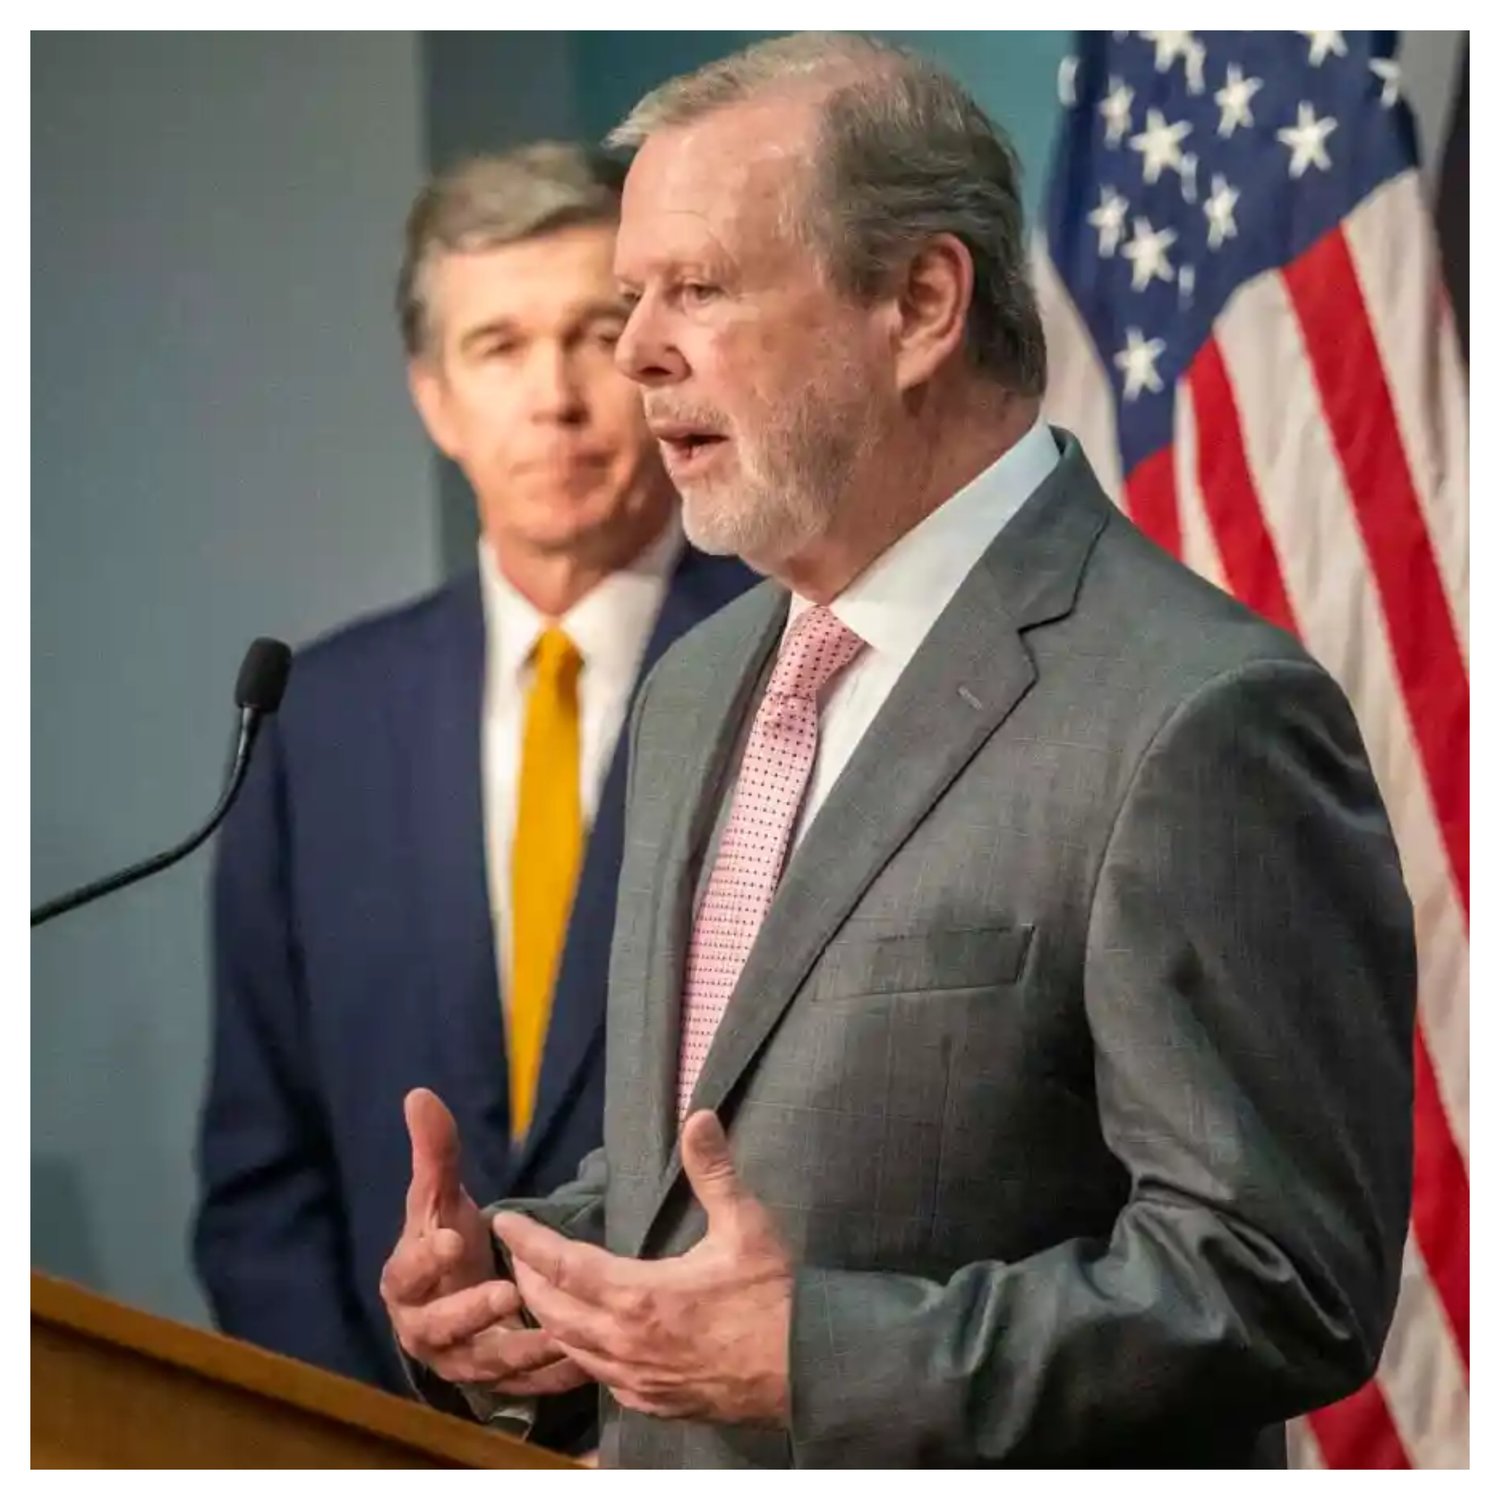 State Senate leader Phil Berger, left, and House Speaker Tim Moore, not pictured, have announced an agreement to expand Medicare in North Carolina. Gov. Roy Cooper, left, has said he wants to review the details in the legislation.